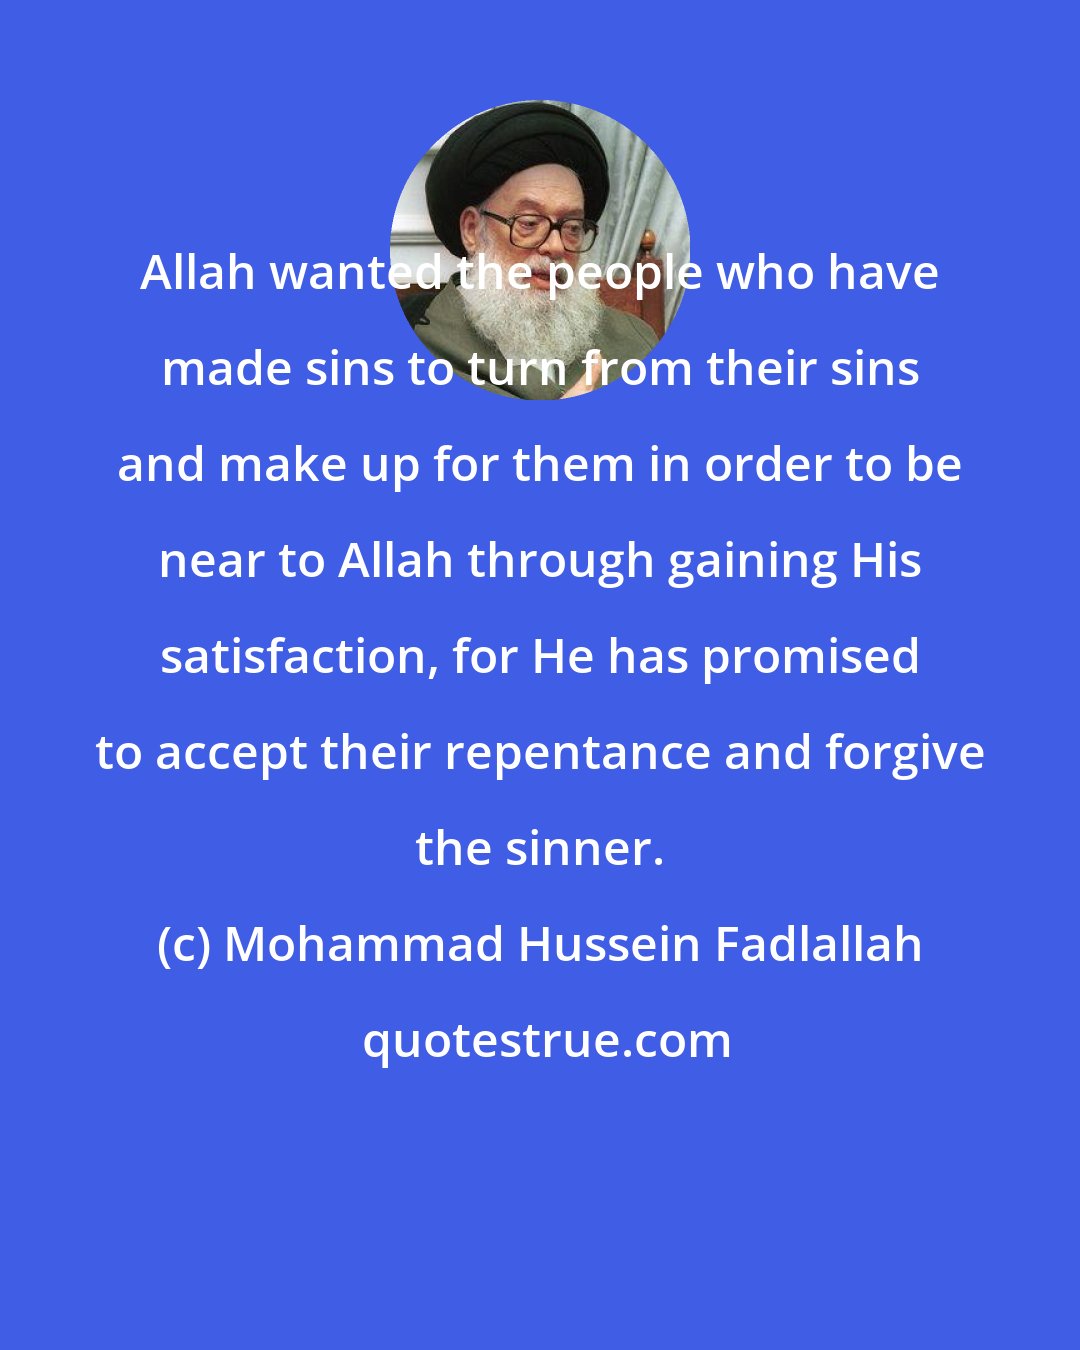 Mohammad Hussein Fadlallah: Allah wanted the people who have made sins to turn from their sins and make up for them in order to be near to Allah through gaining His satisfaction, for He has promised to accept their repentance and forgive the sinner.